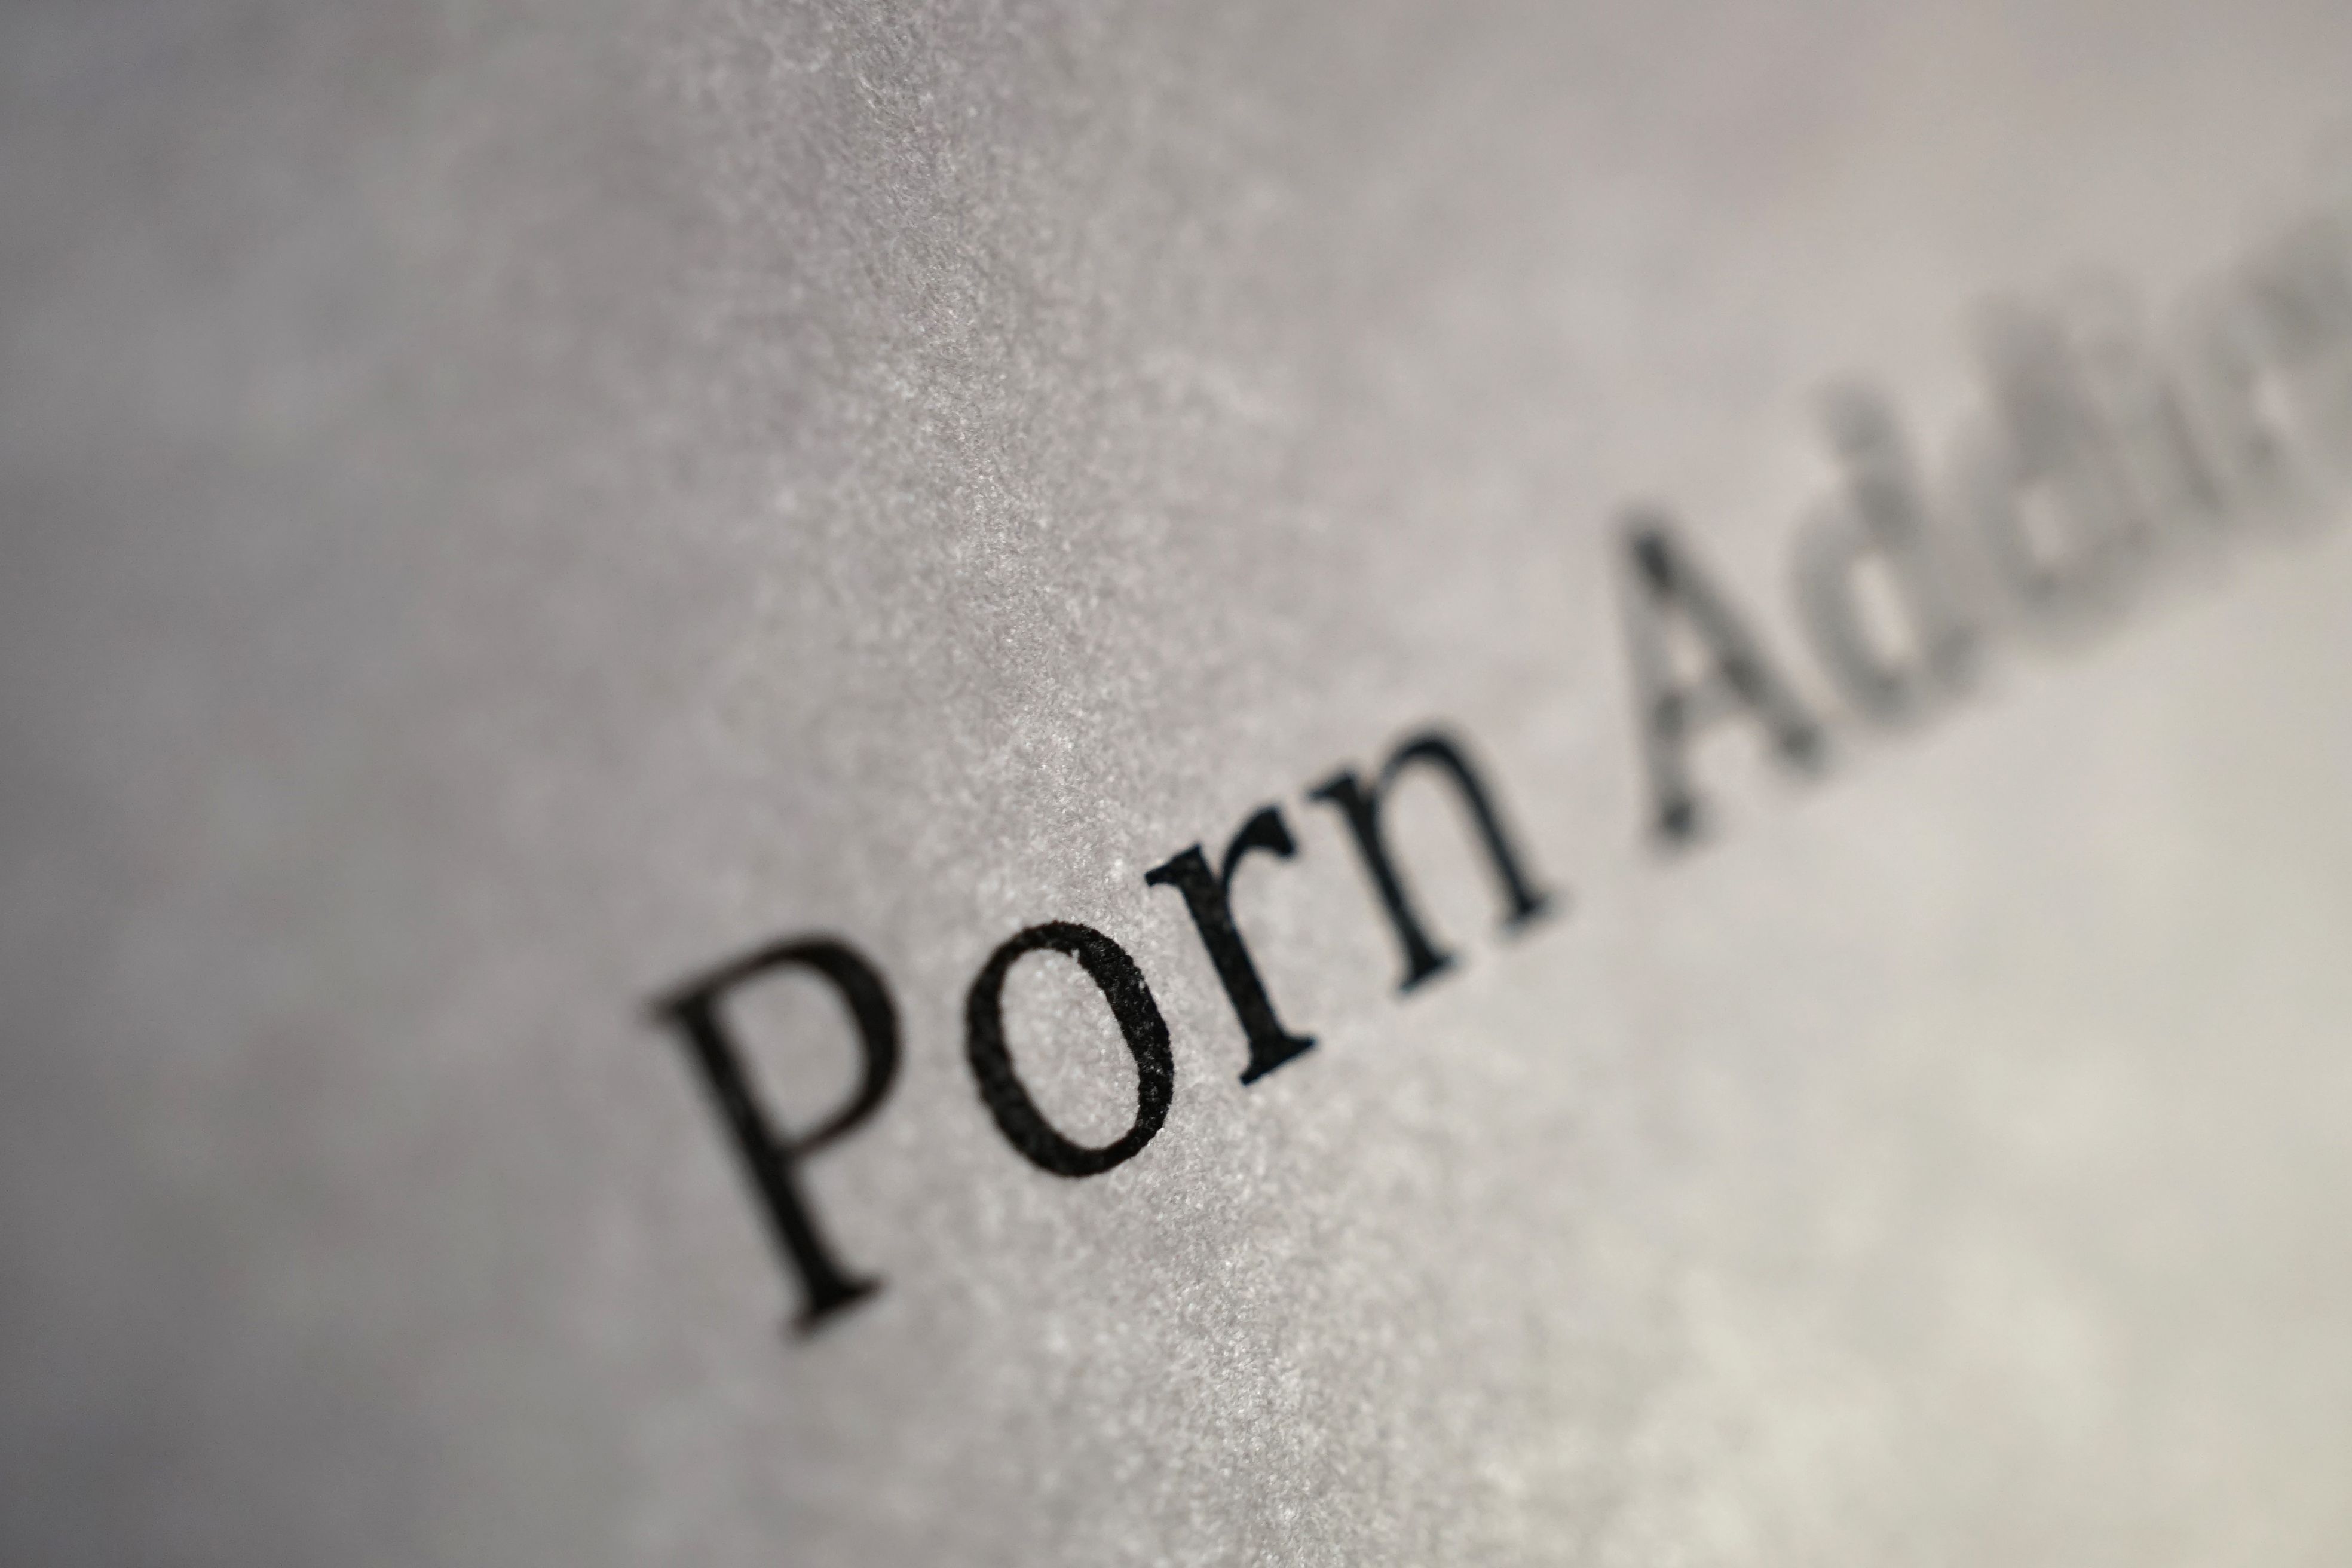 Porn Addiction: How to Know If You're Addicted to Porn and ...